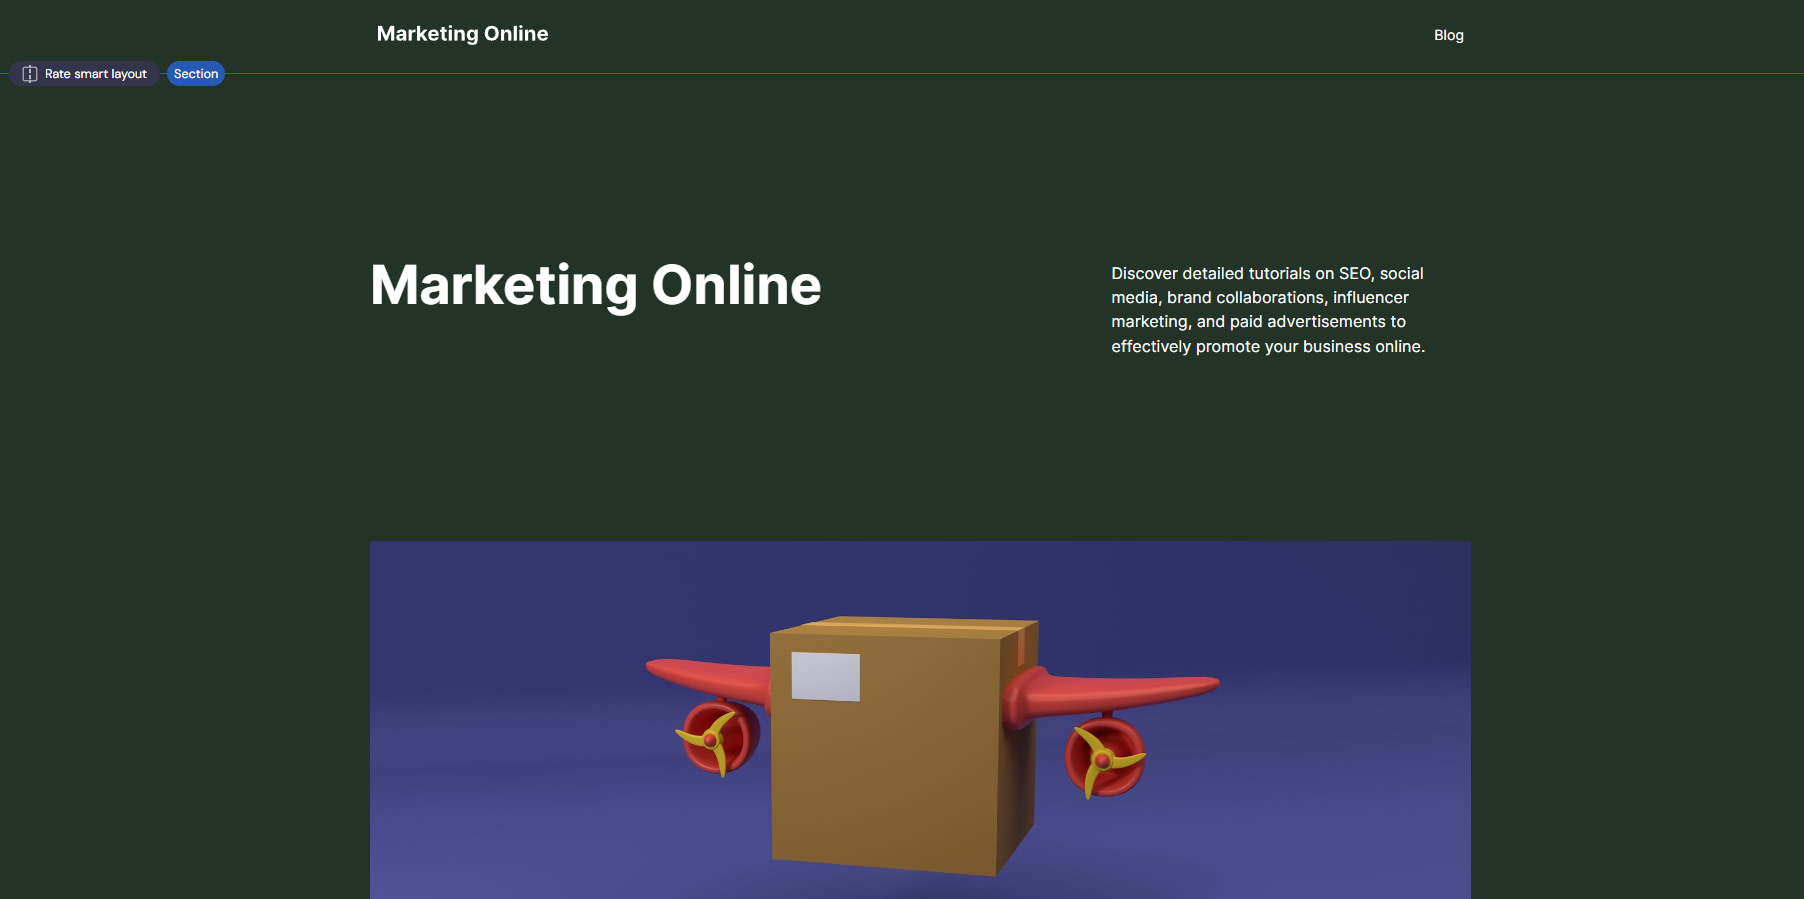 Forest green website with the header "Marketing Online" on one side and a short blurb about detailed tutorials on the other side.